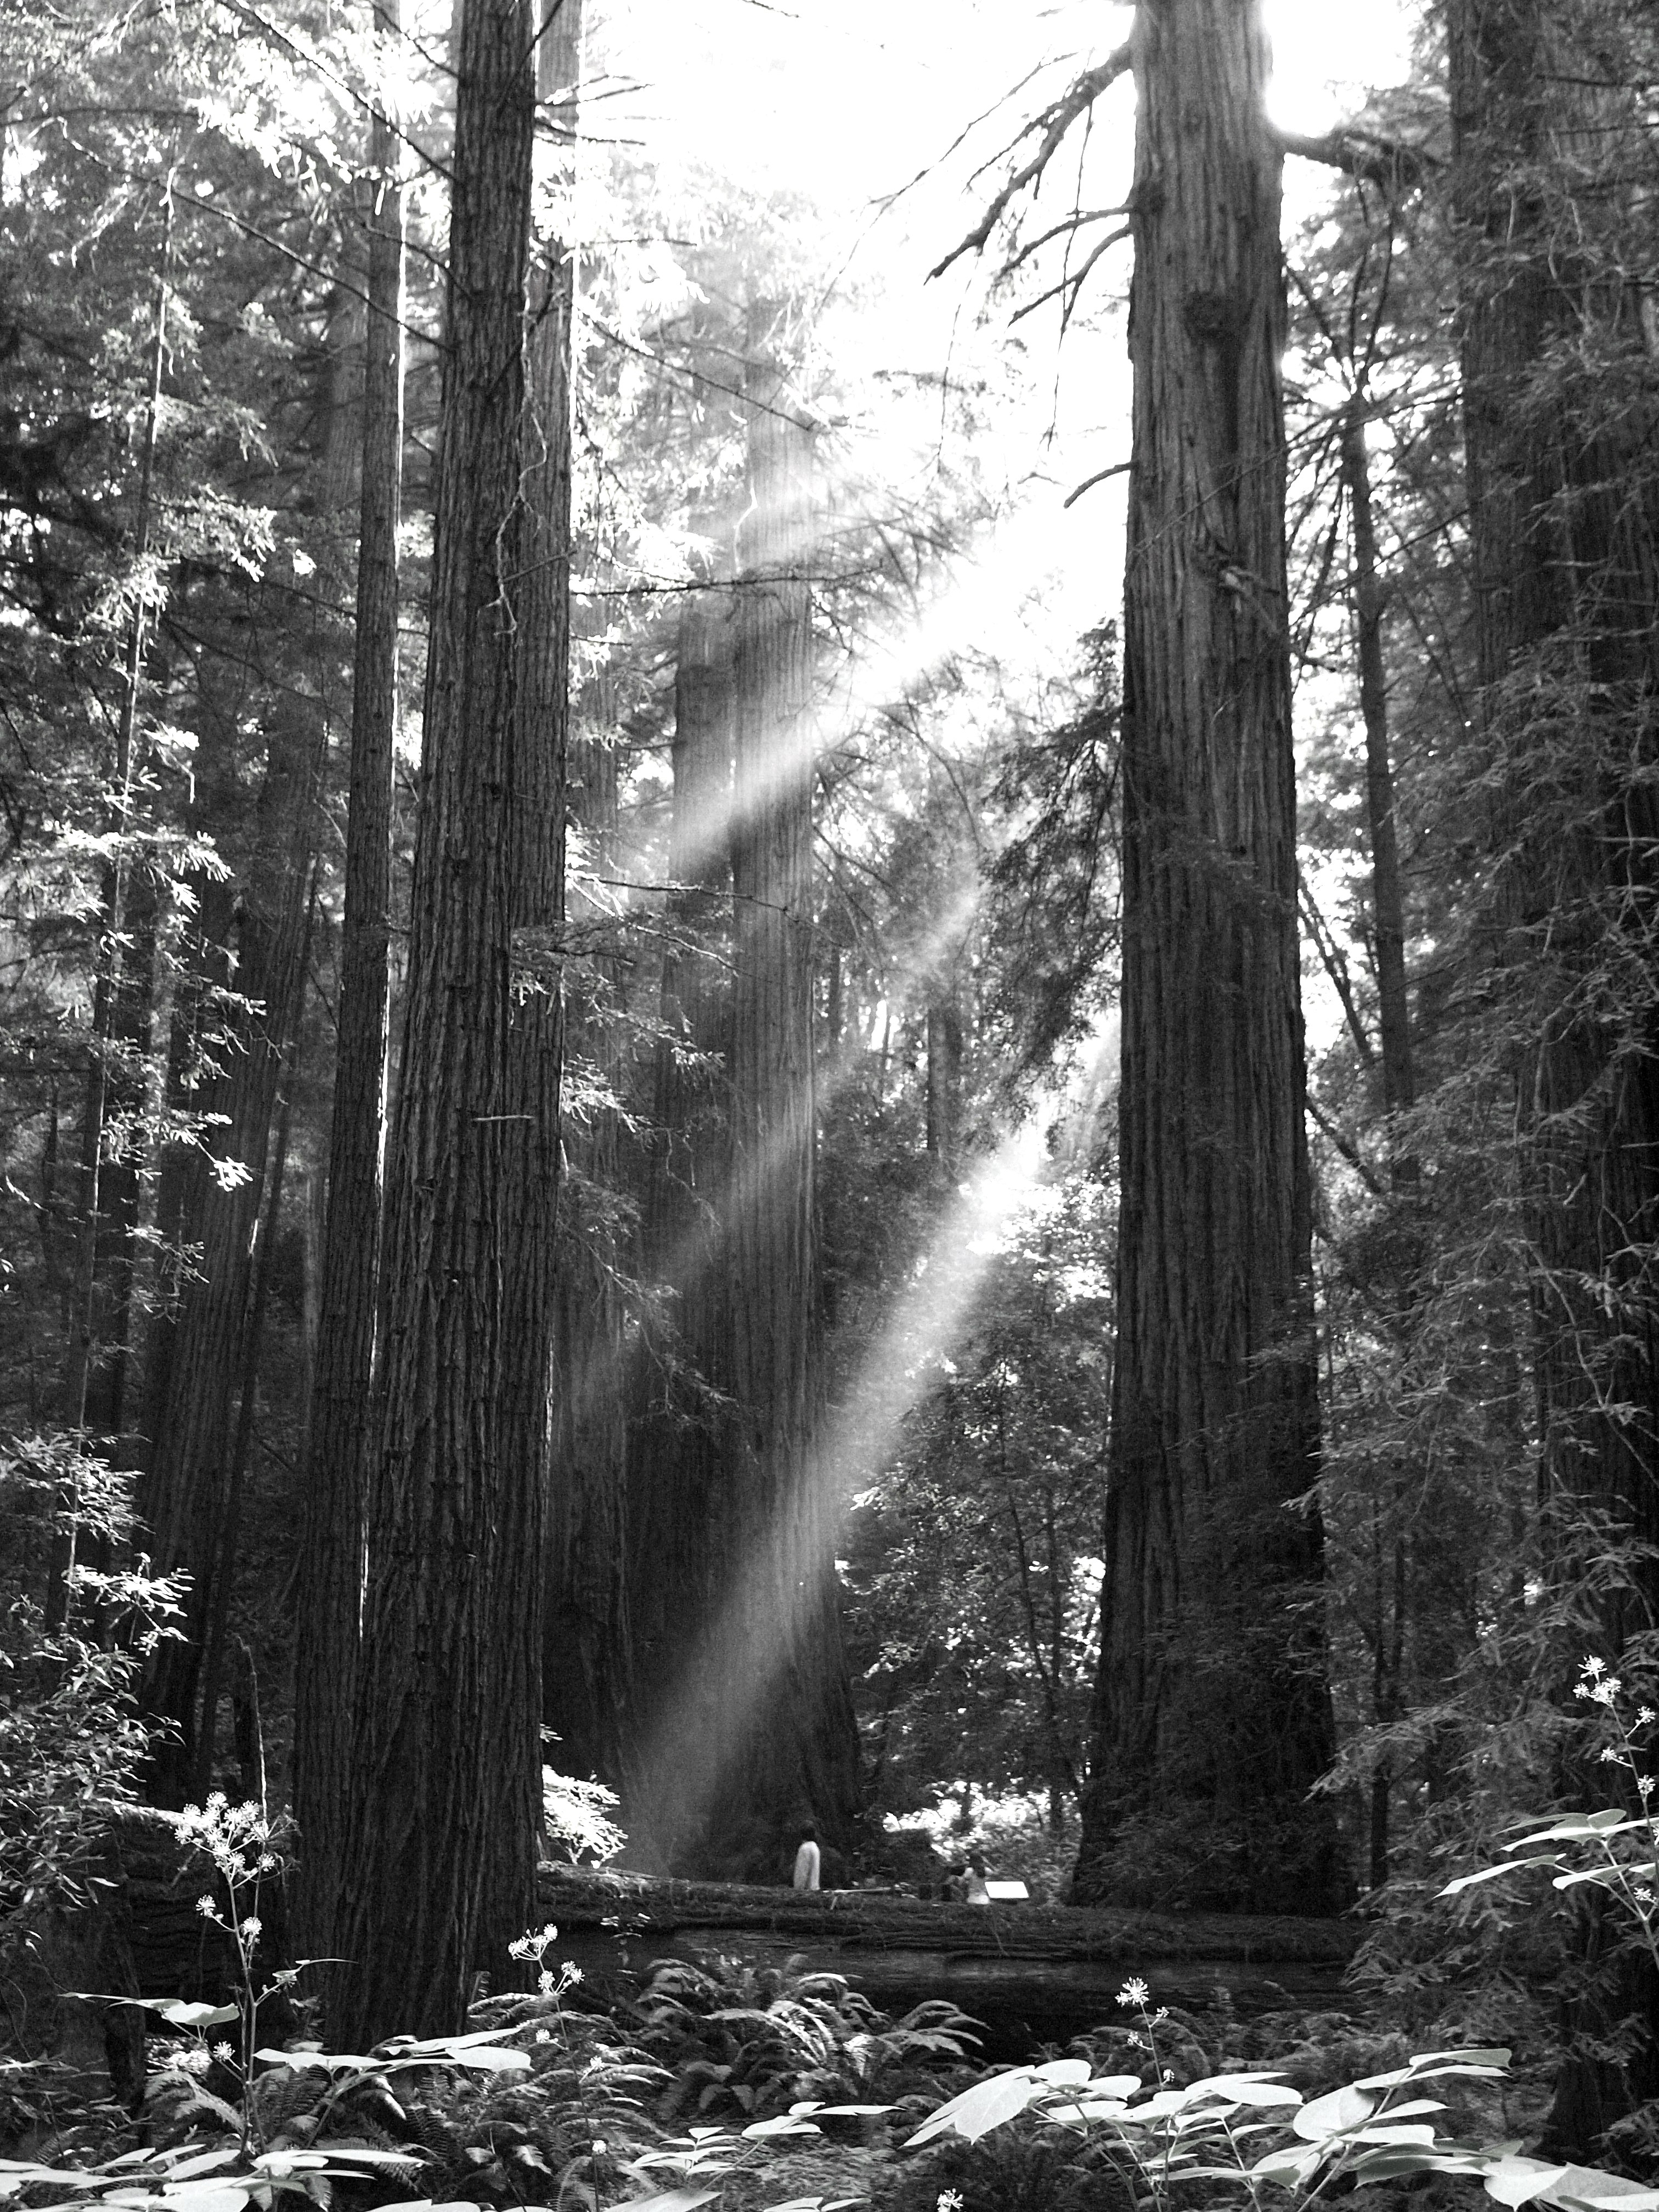 Sun rays shine down on a visitor among very tall redwood trees